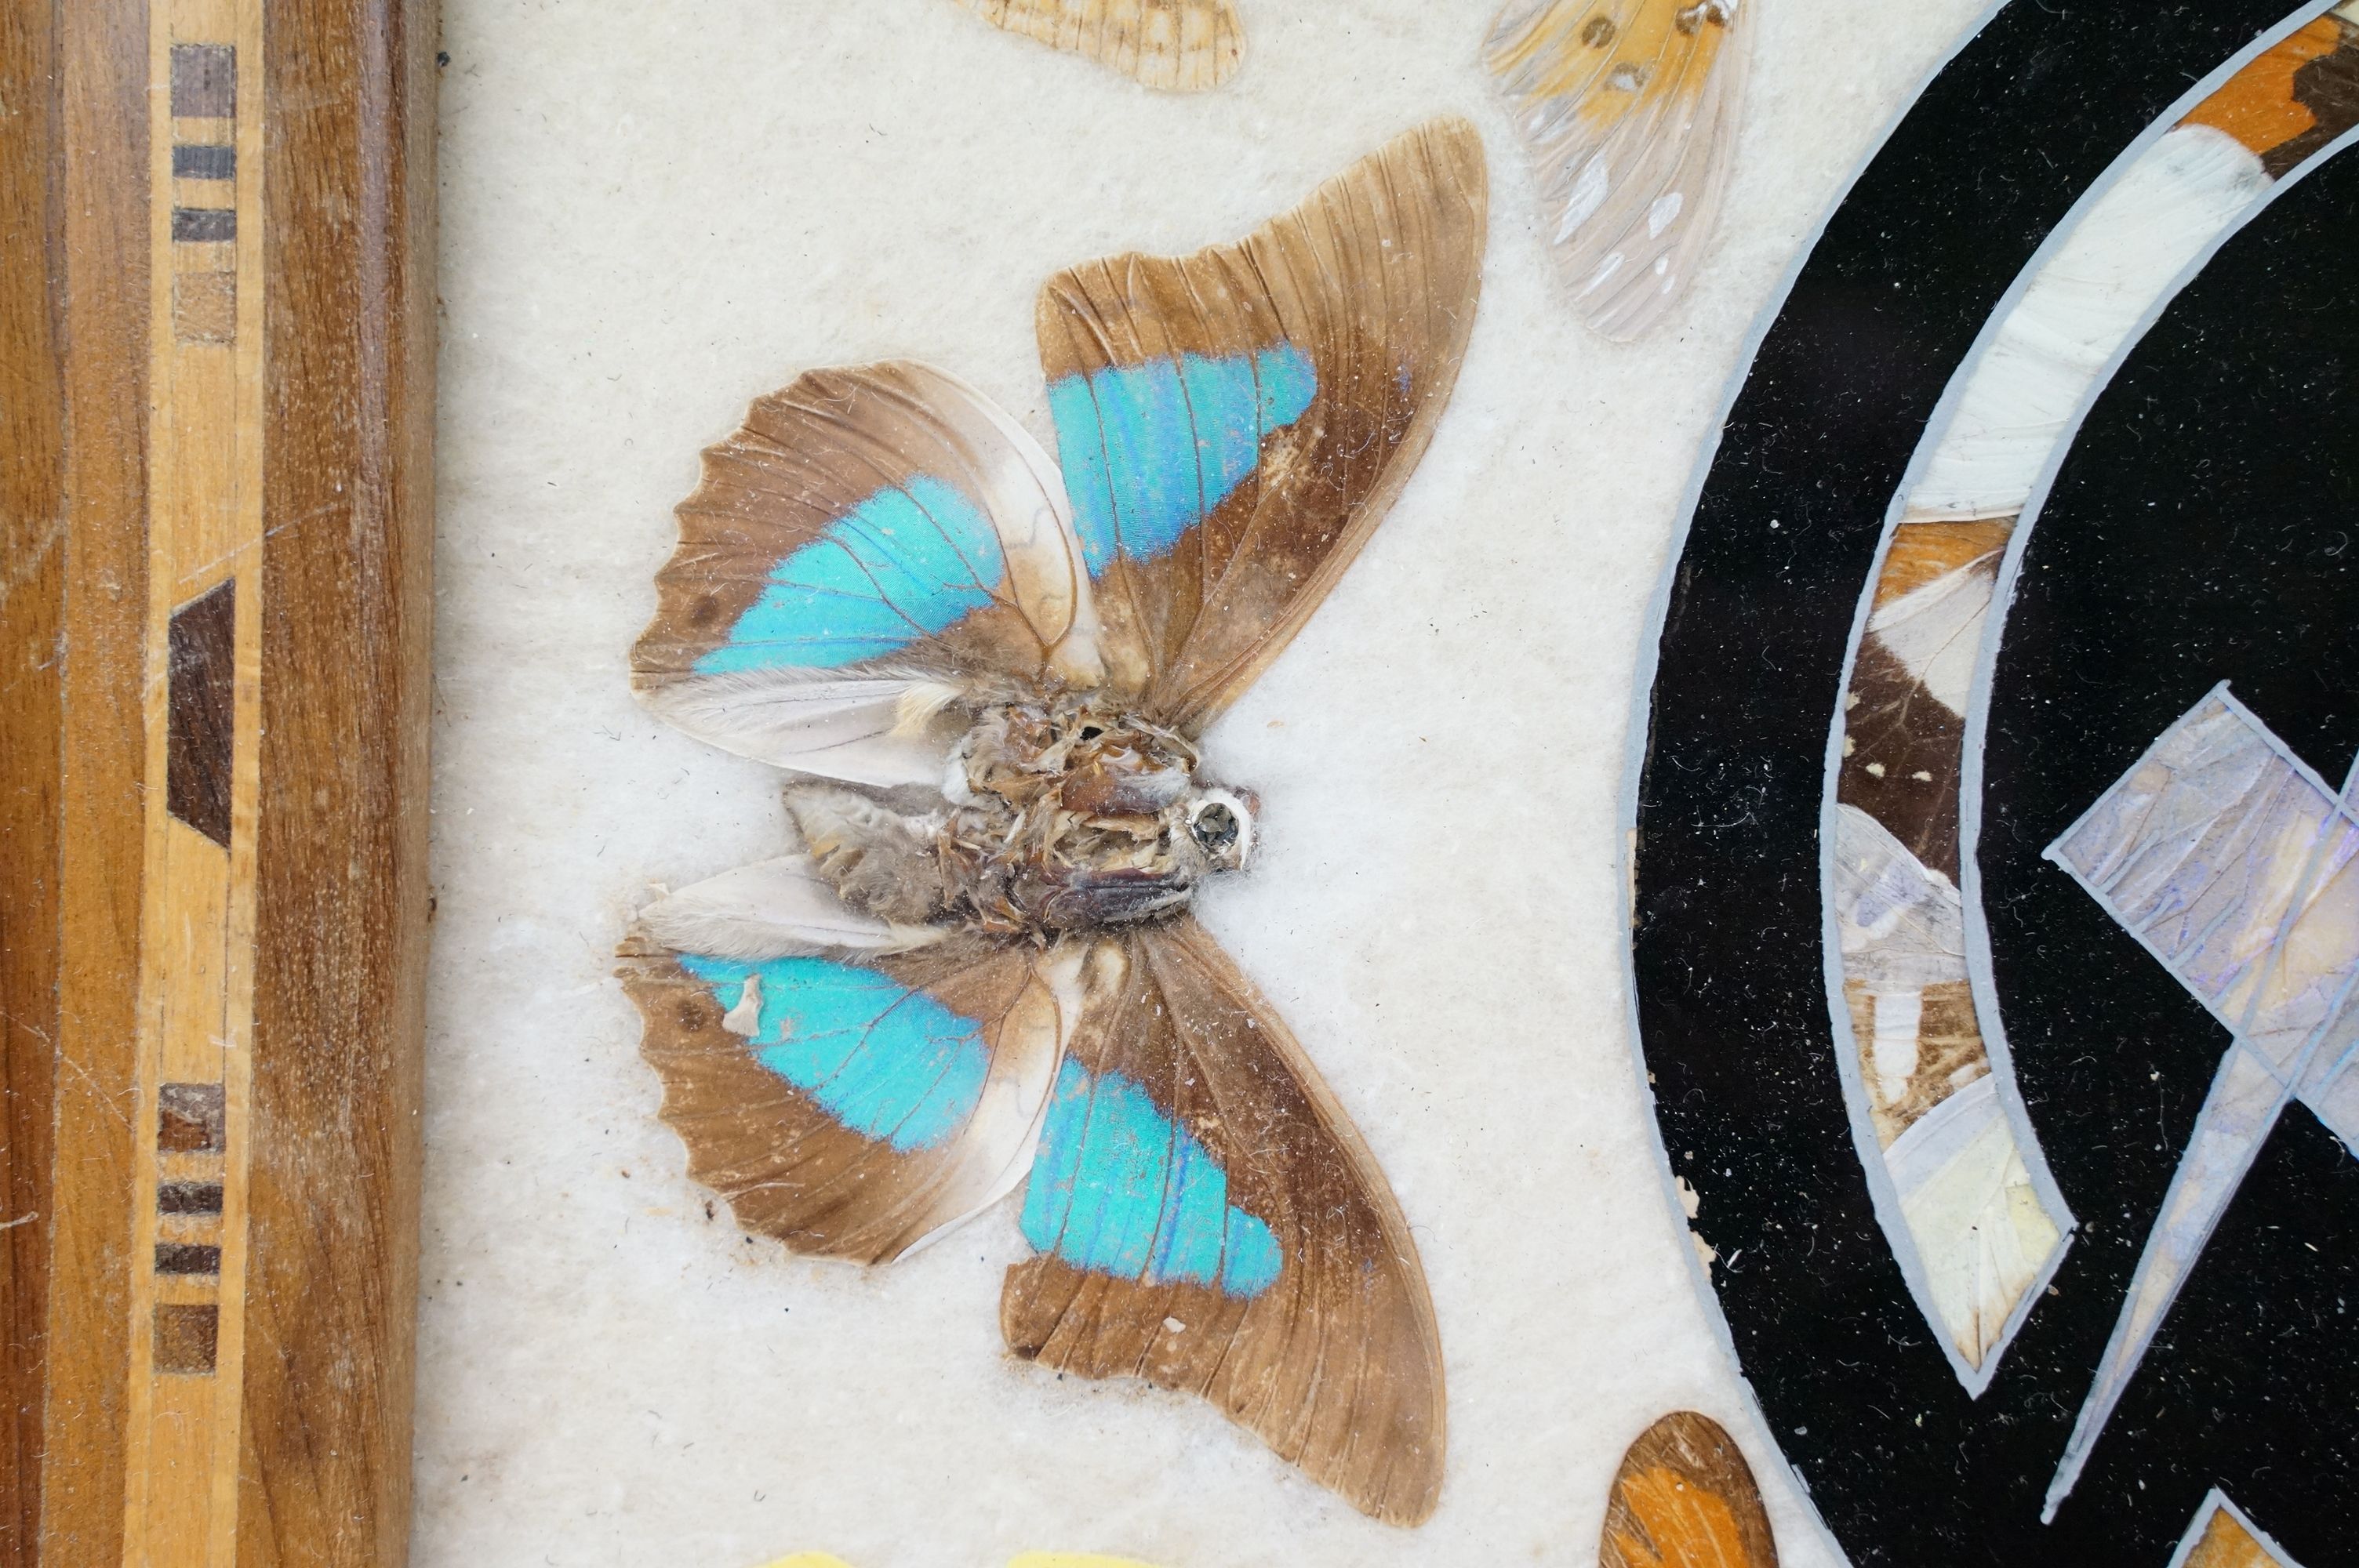 Early 20th century inlaid wooden tray with butterfly specimens and masonic butterfly wing emblem - Image 4 of 11